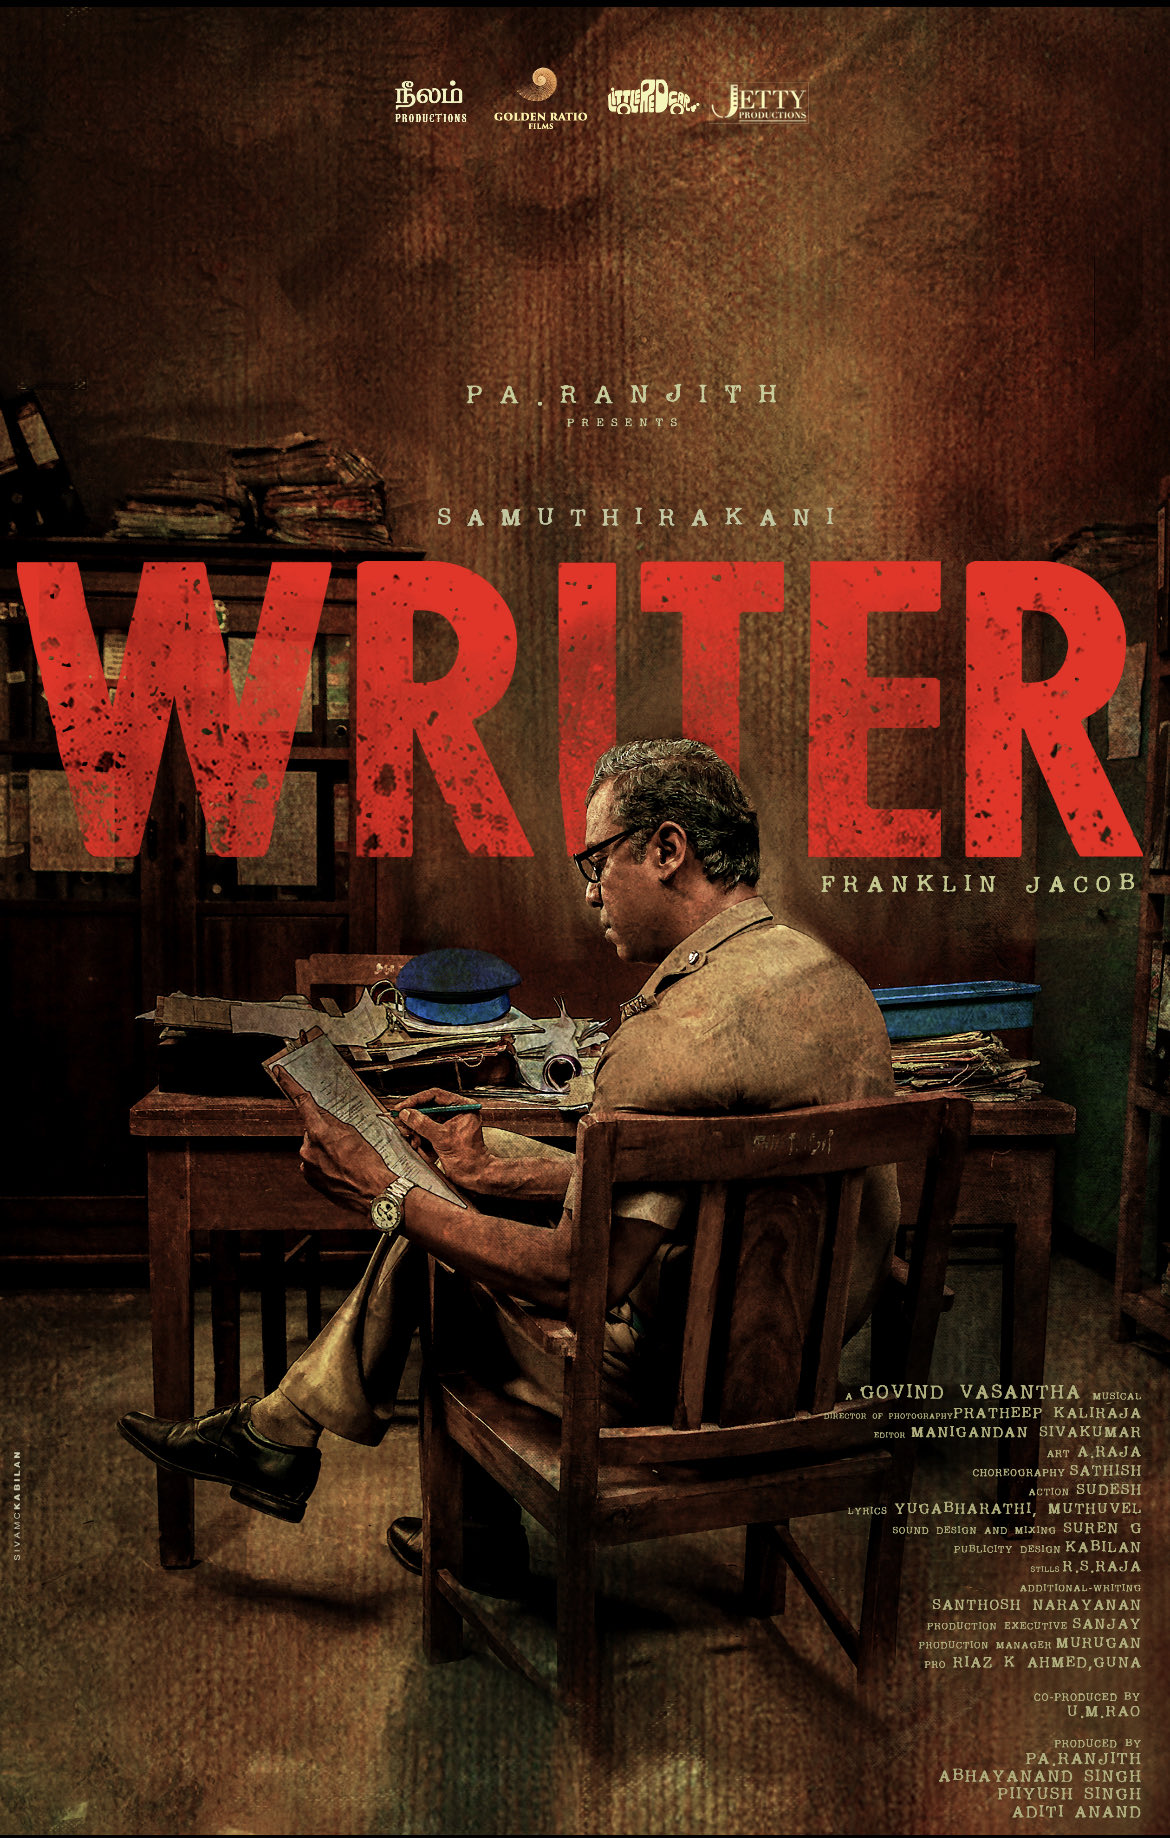 Interesting first look of Pa Ranjith’s next productional venture Writer ft Samuthirakani out